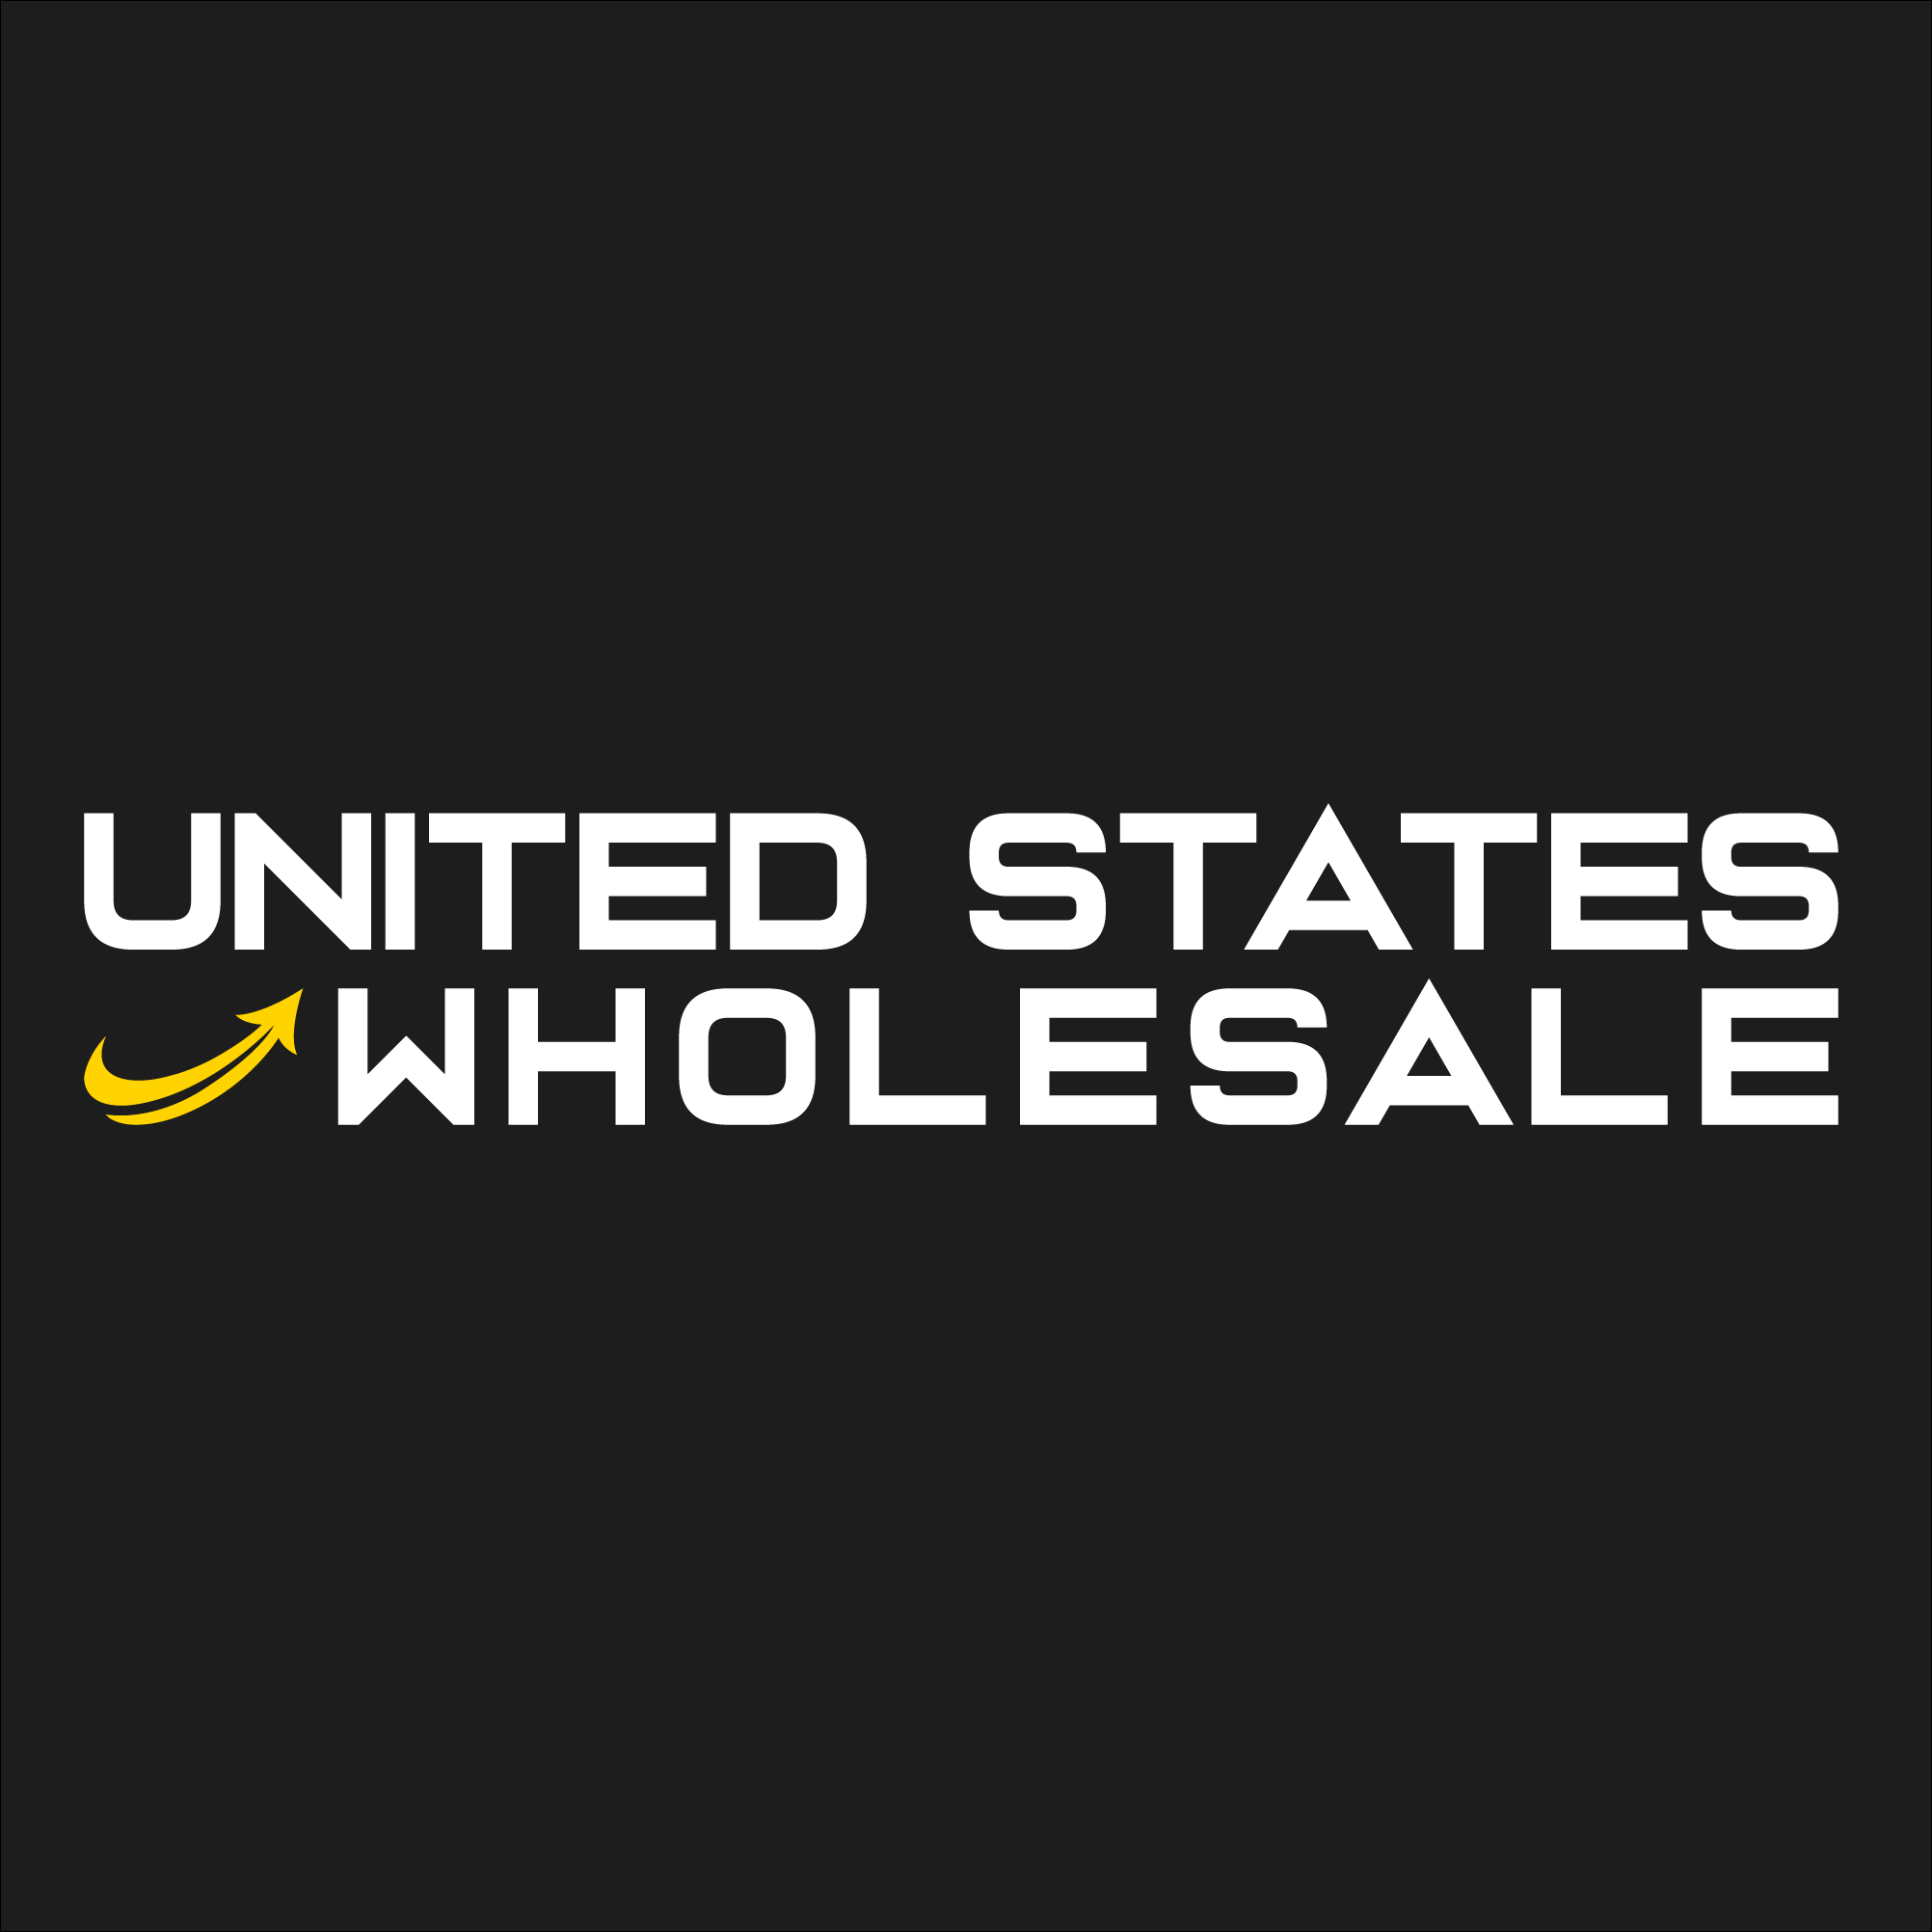 usa wholesale suppliers: a comprehensive guide